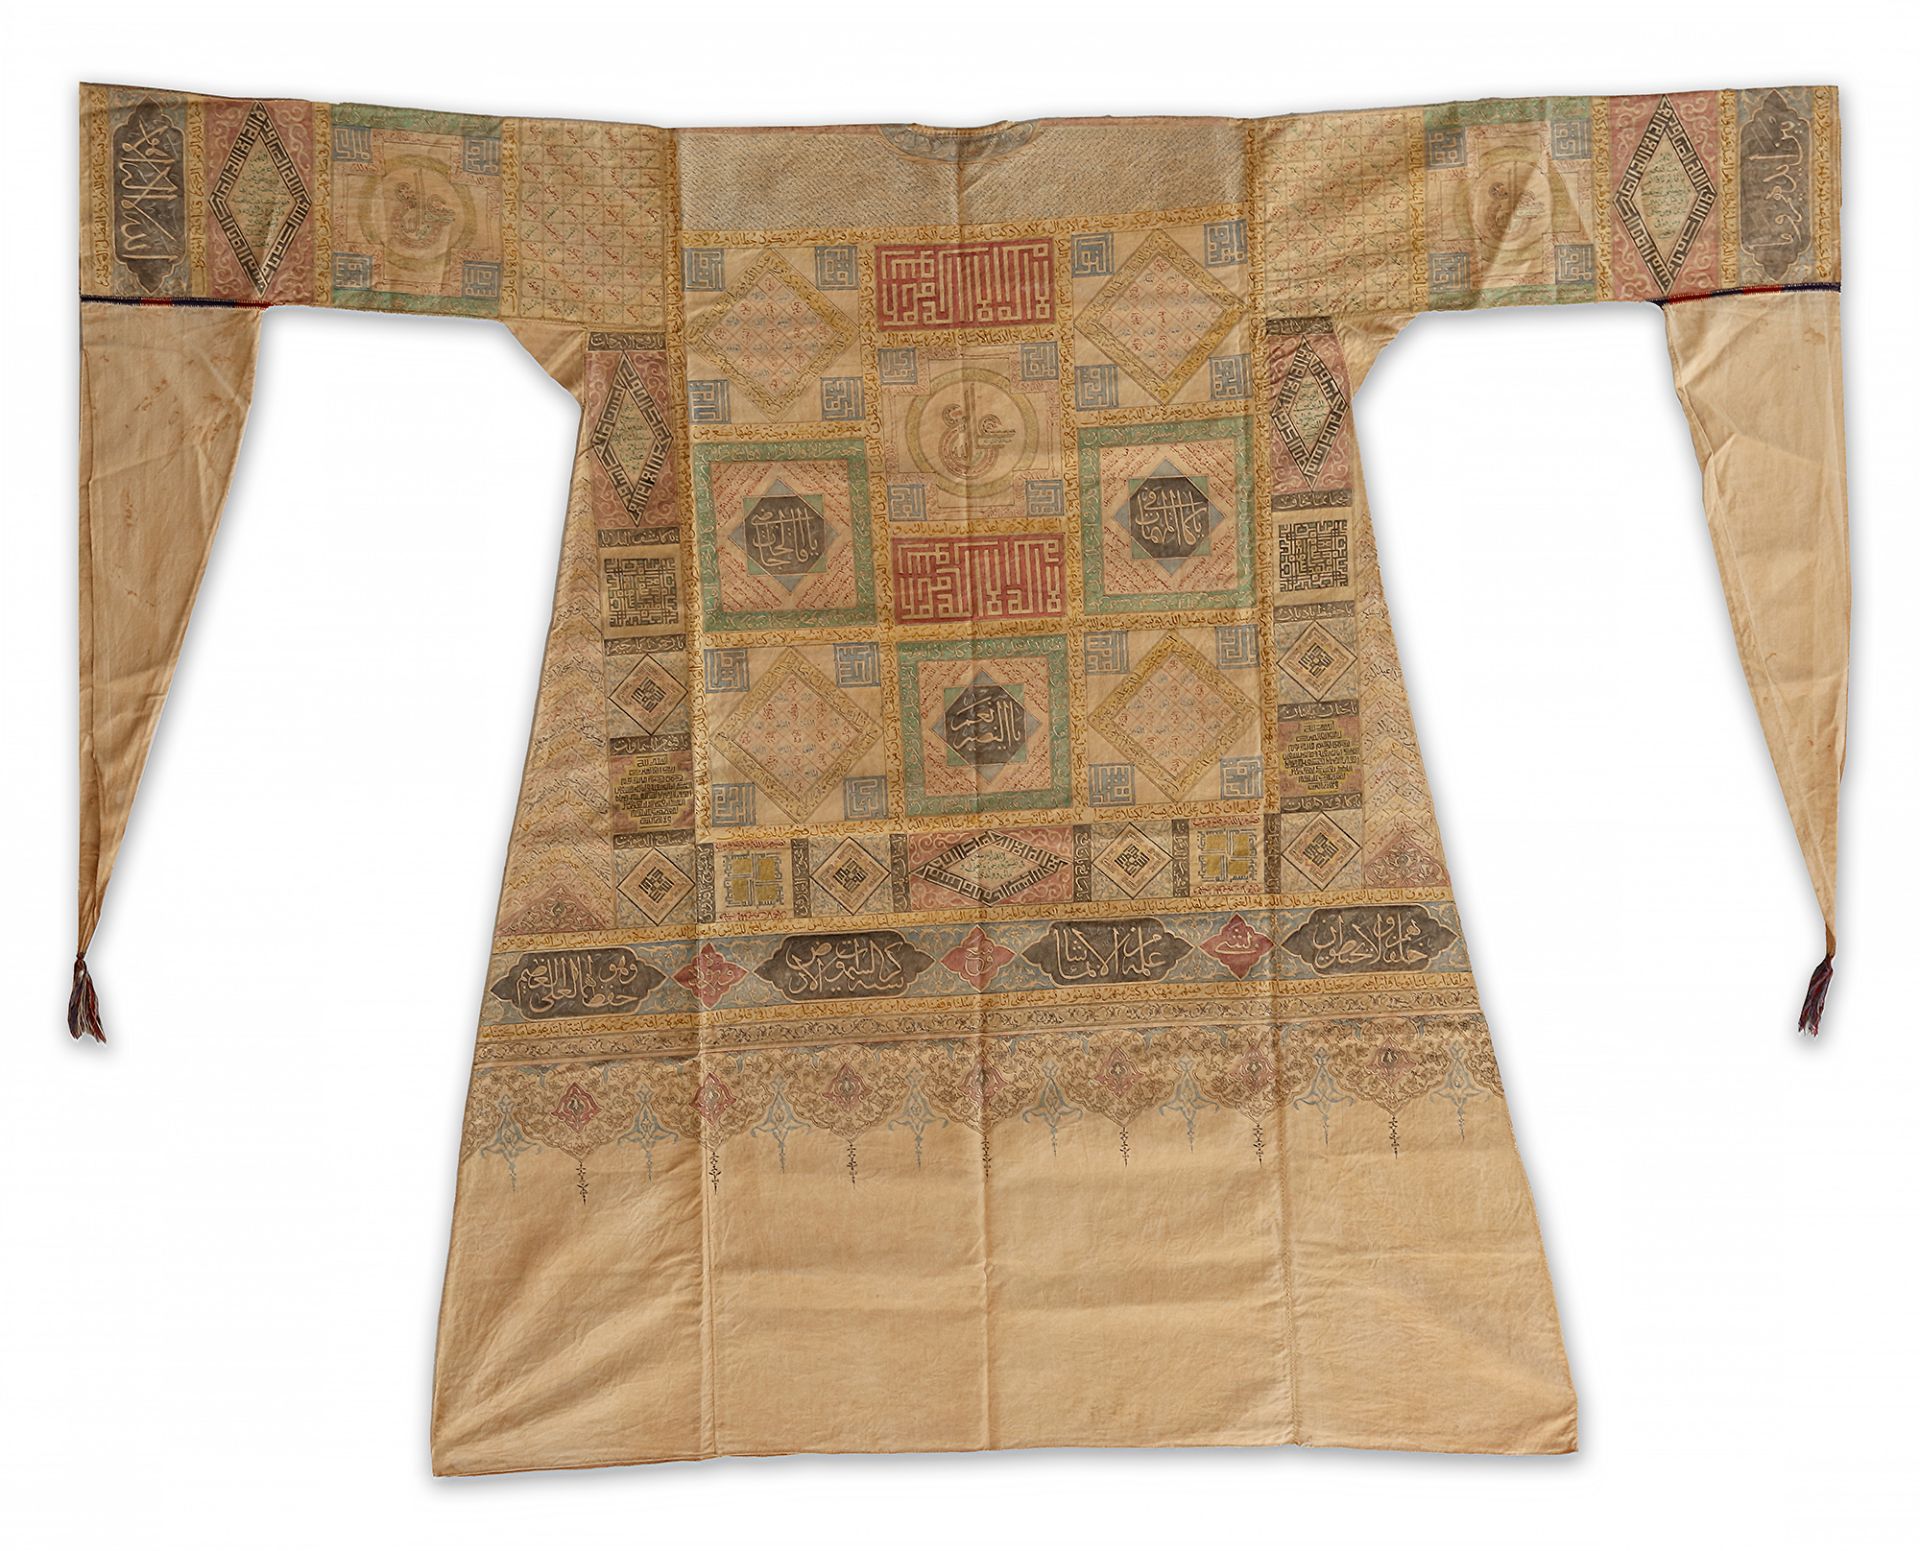 AN OTTOMAN TALISMANIC SHIRT (JAMA) WITH EXTRACTS FROM THE QURAN AND PRAYERS, TURKEY, 17TH-18TH CENTU - Image 2 of 2